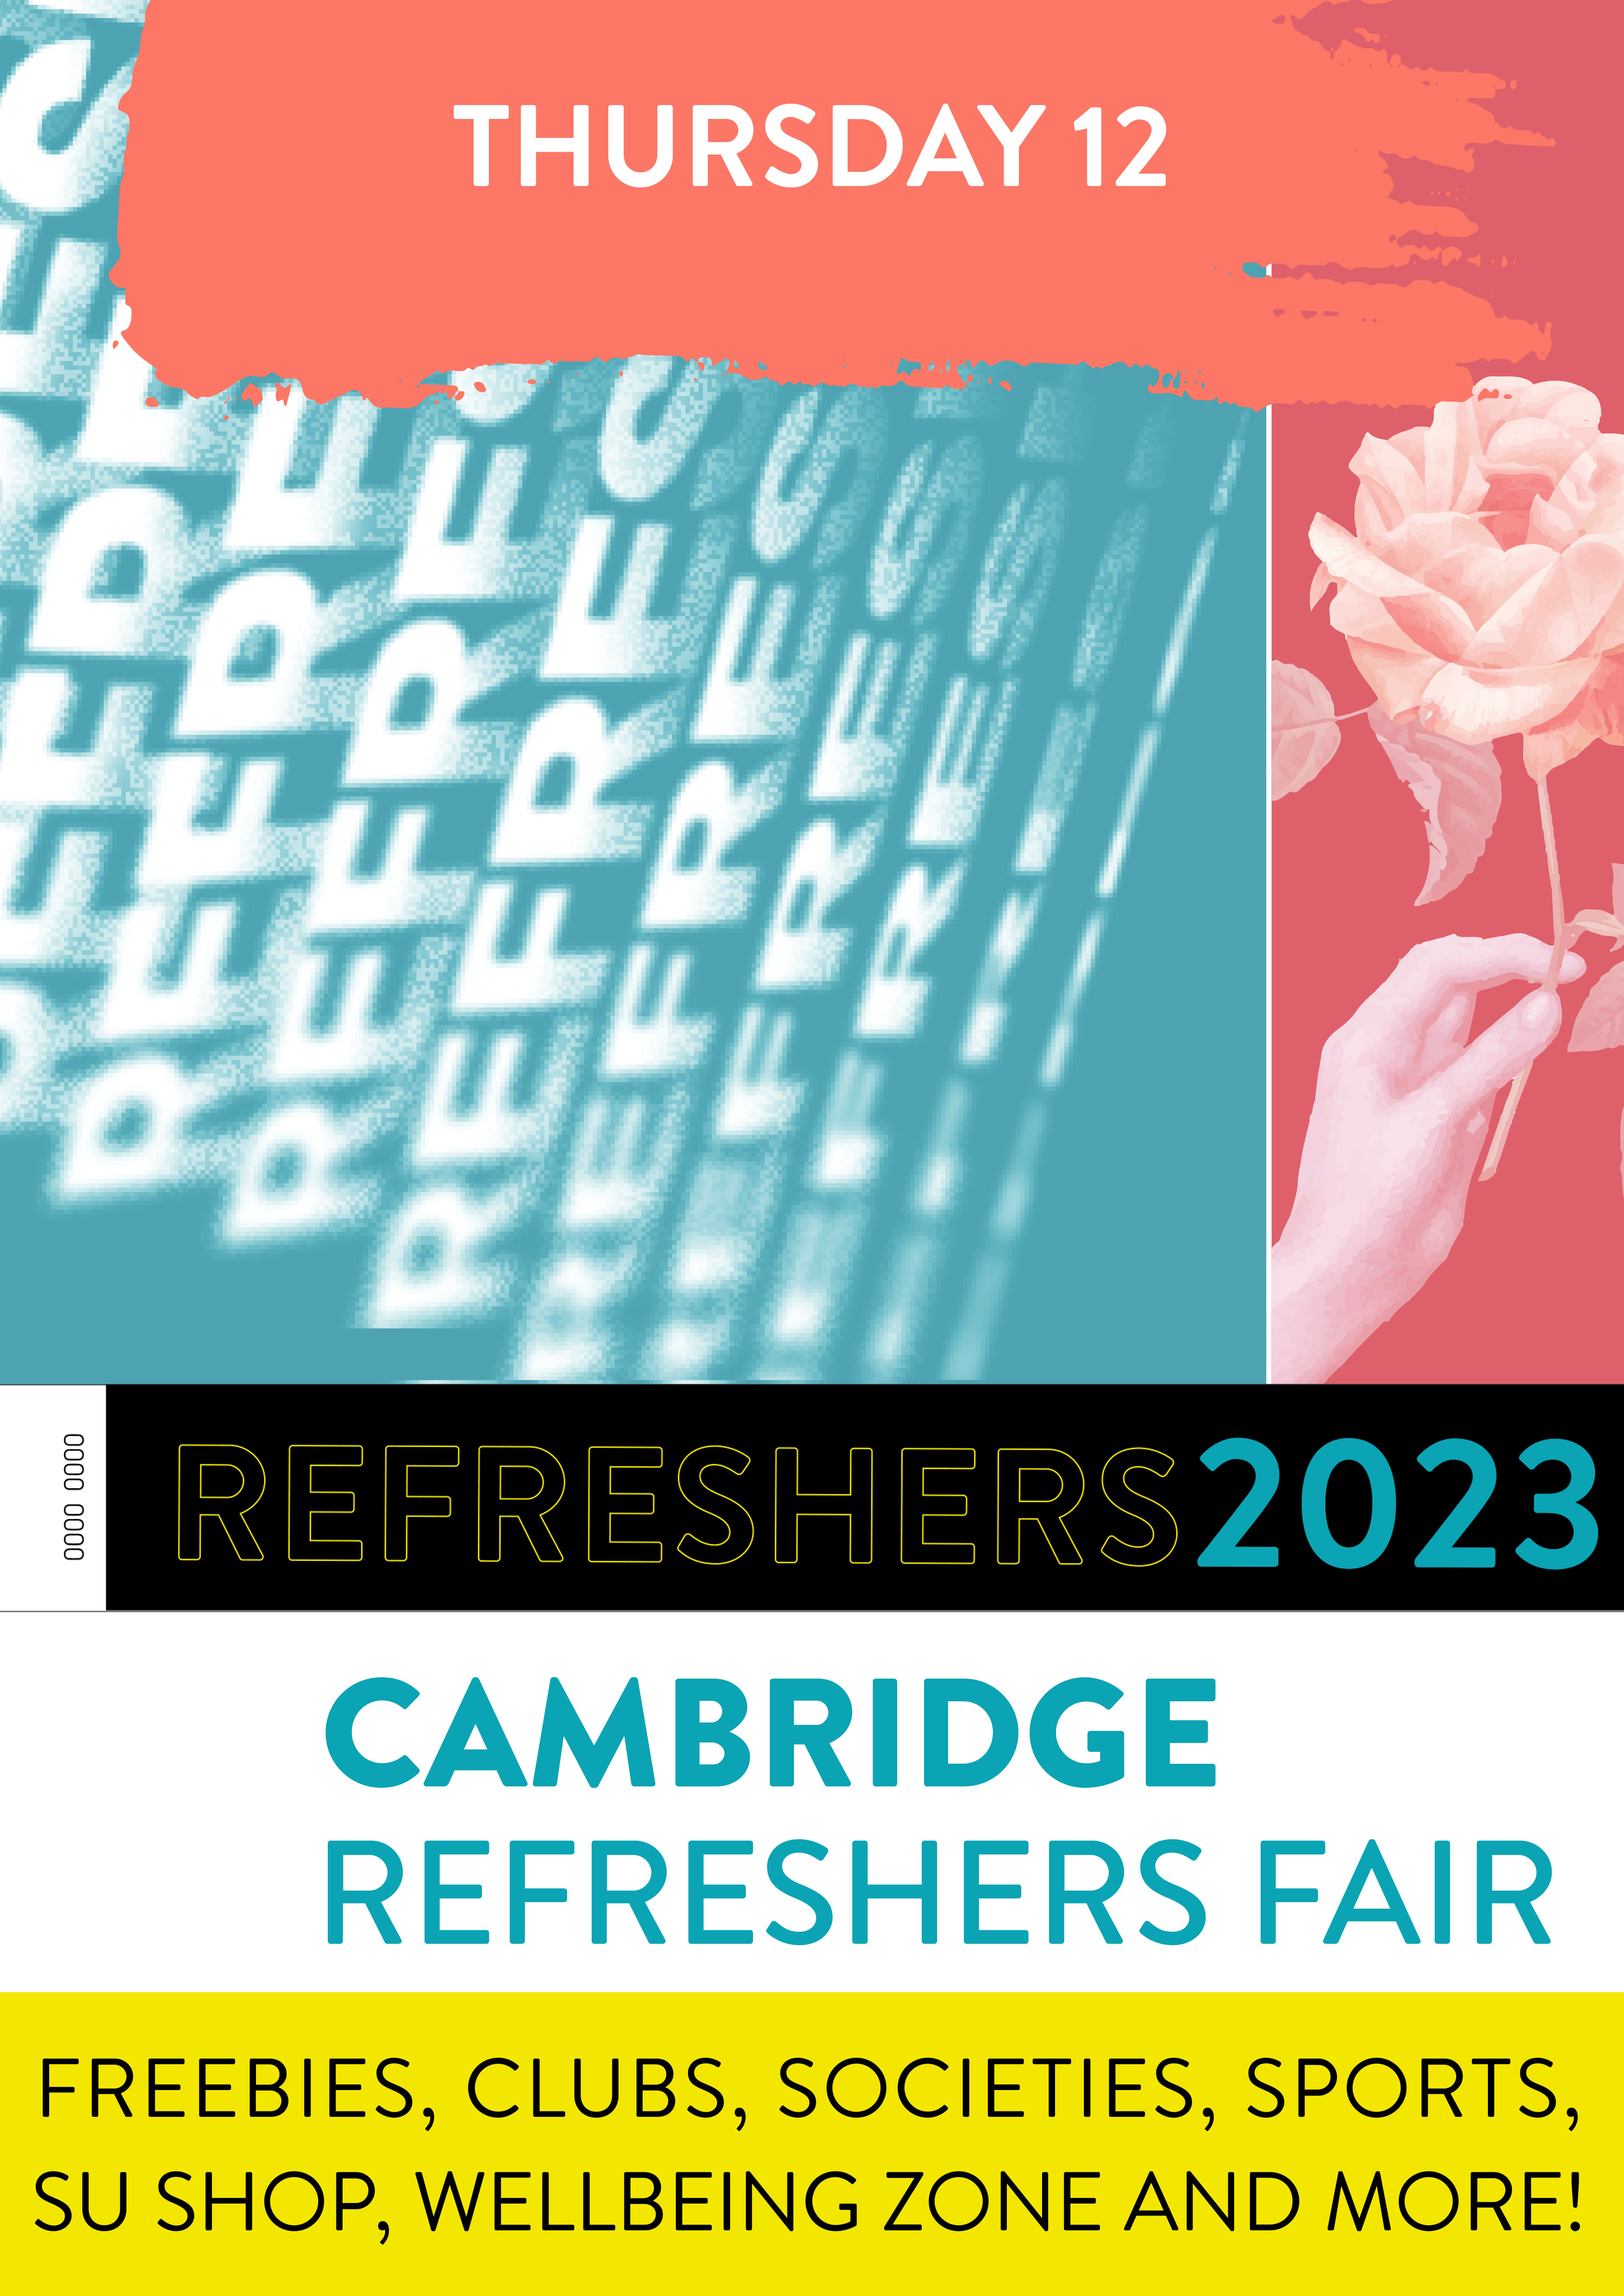 Thursday 12 January. Cambridge Refreshers Fair. Freebies, Clubs, Societies, Sports, SU Shop, Wellbeing Zone and More!